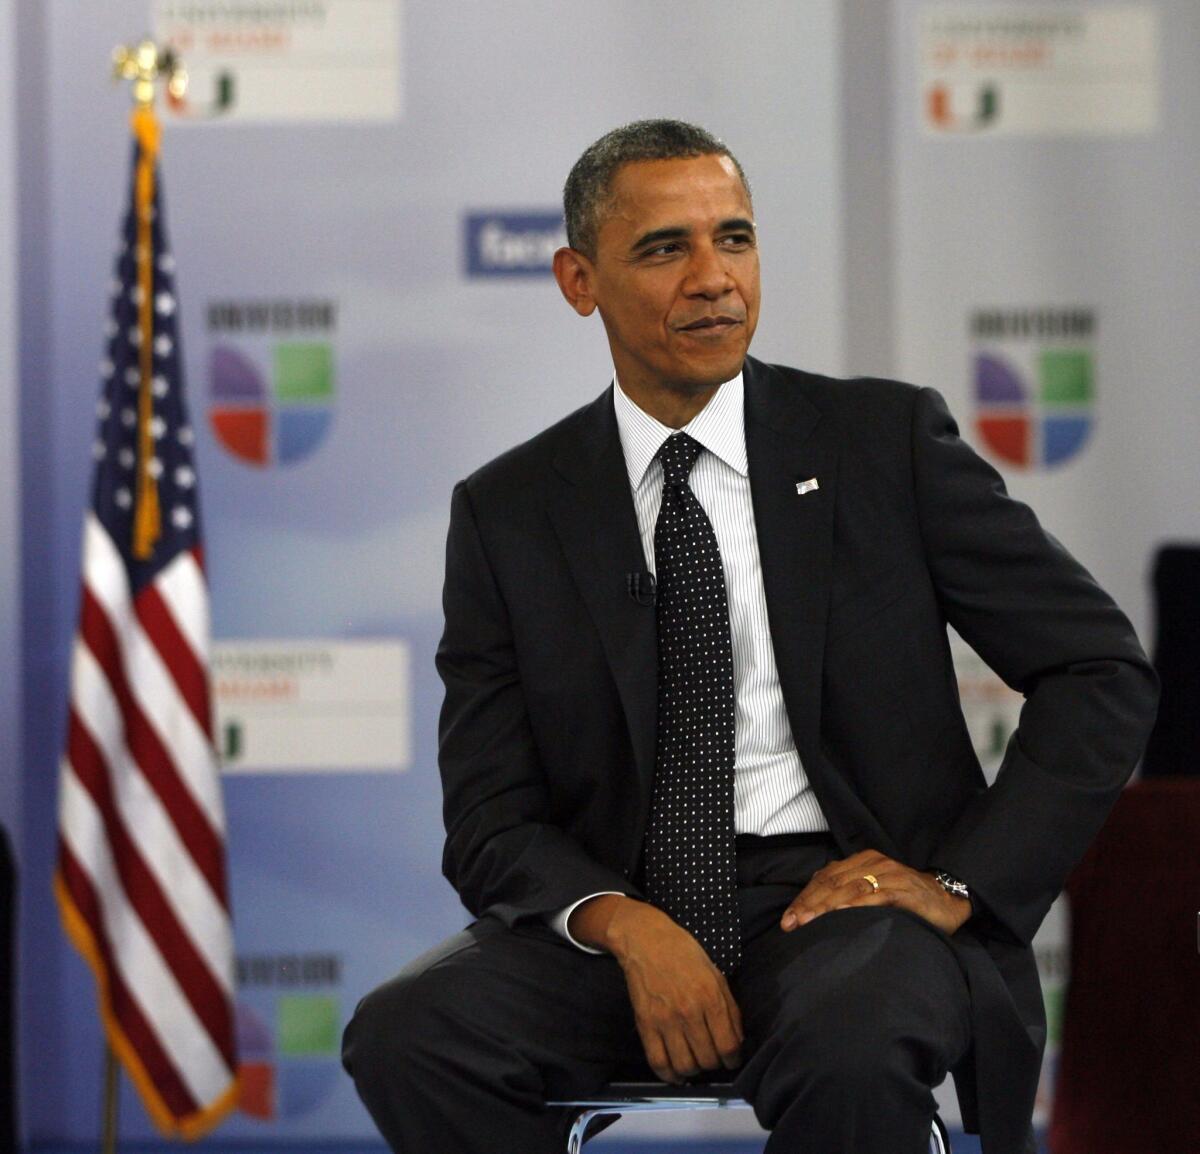 "The most important lesson I've learned is that you can't change Washington from the inside, you can only change it from the outside," said President Obama during a "Meet the Candidates" interview for the Spanish-language network Univision.